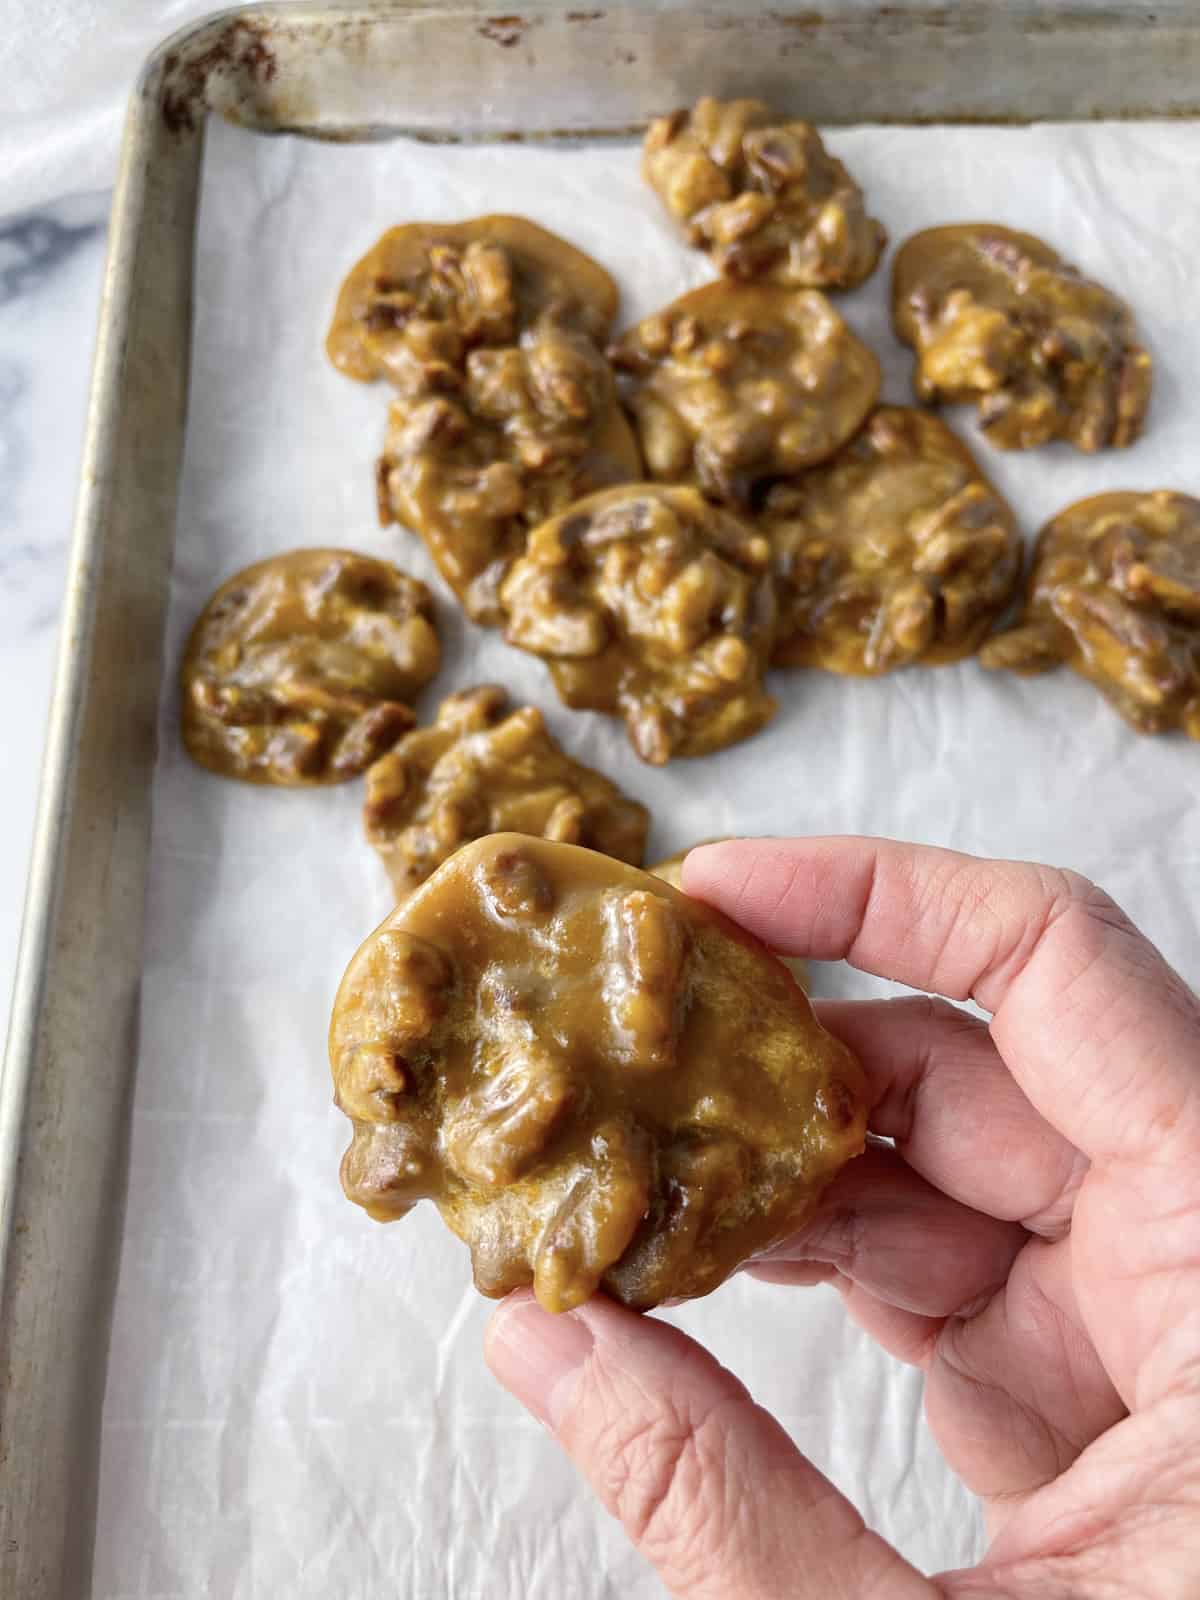 Pecan praline candies on a sheet pan with parchment paper.